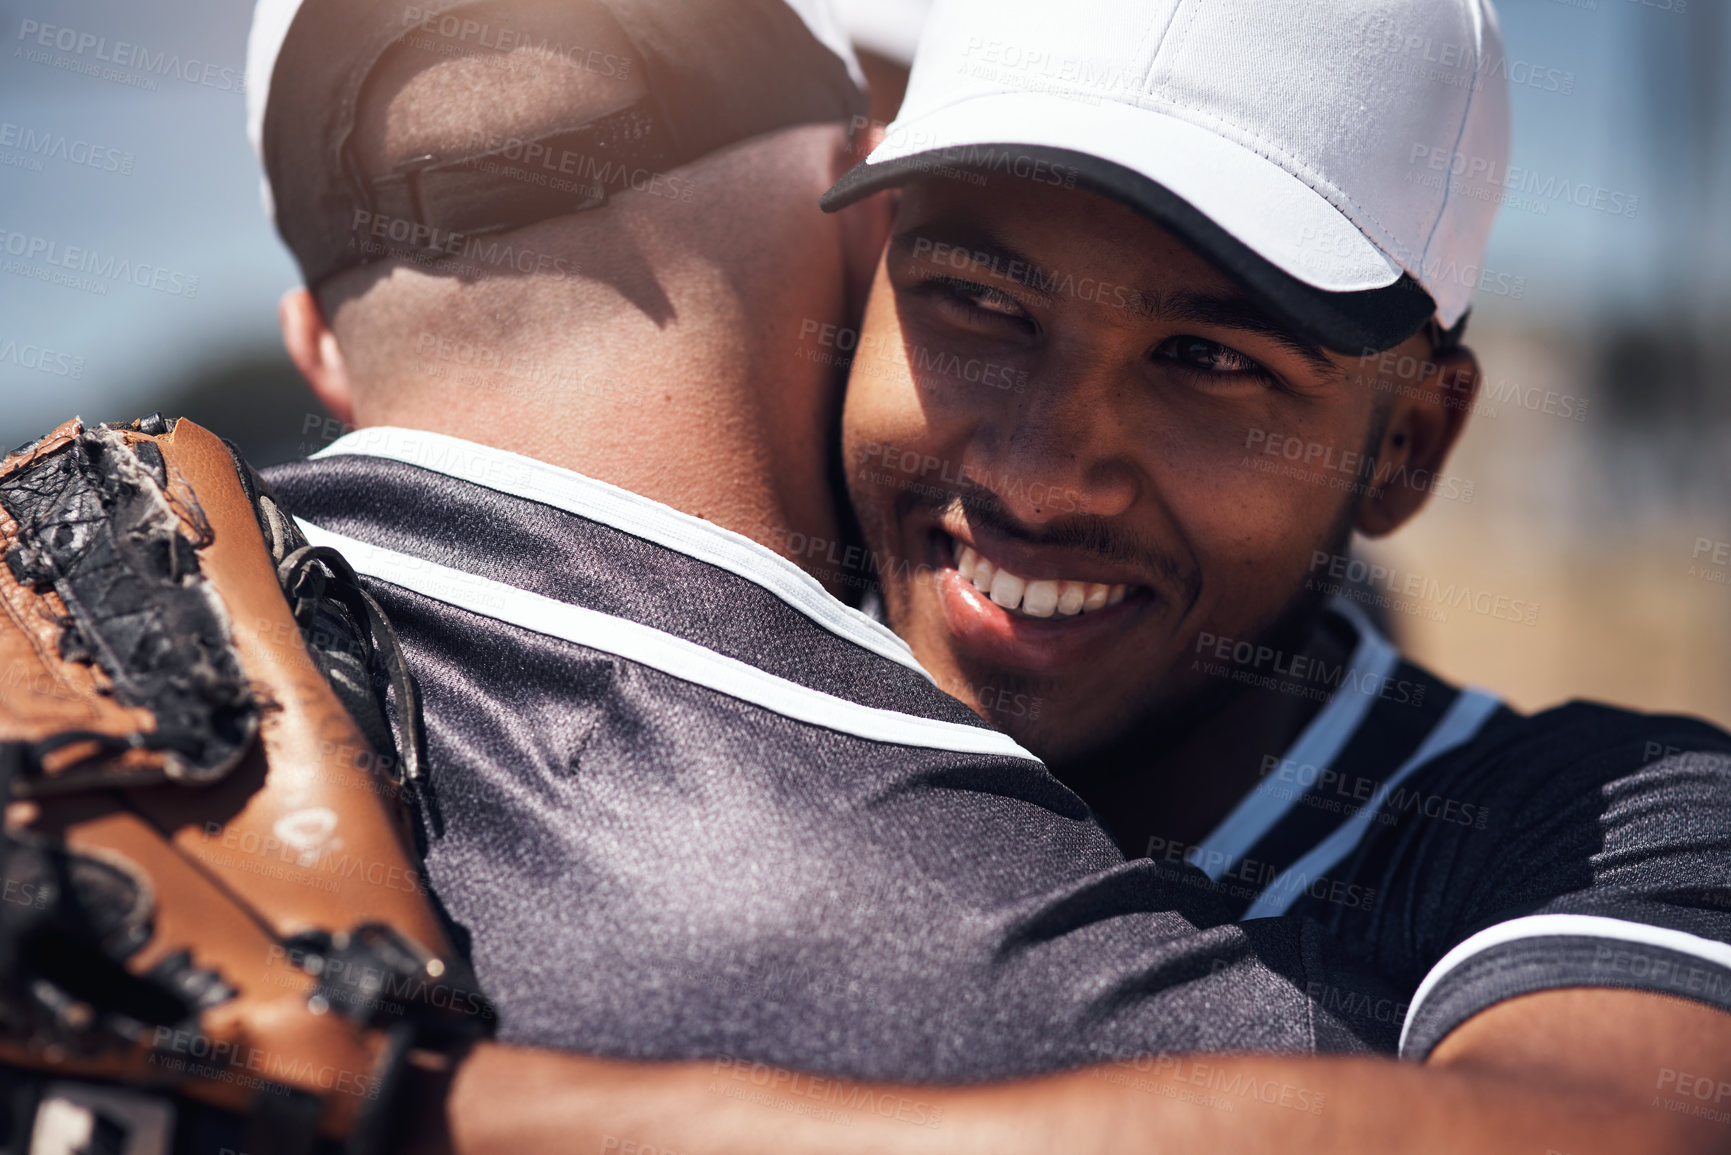 Buy stock photo Shot of two young men embracing after playing a game of baseball